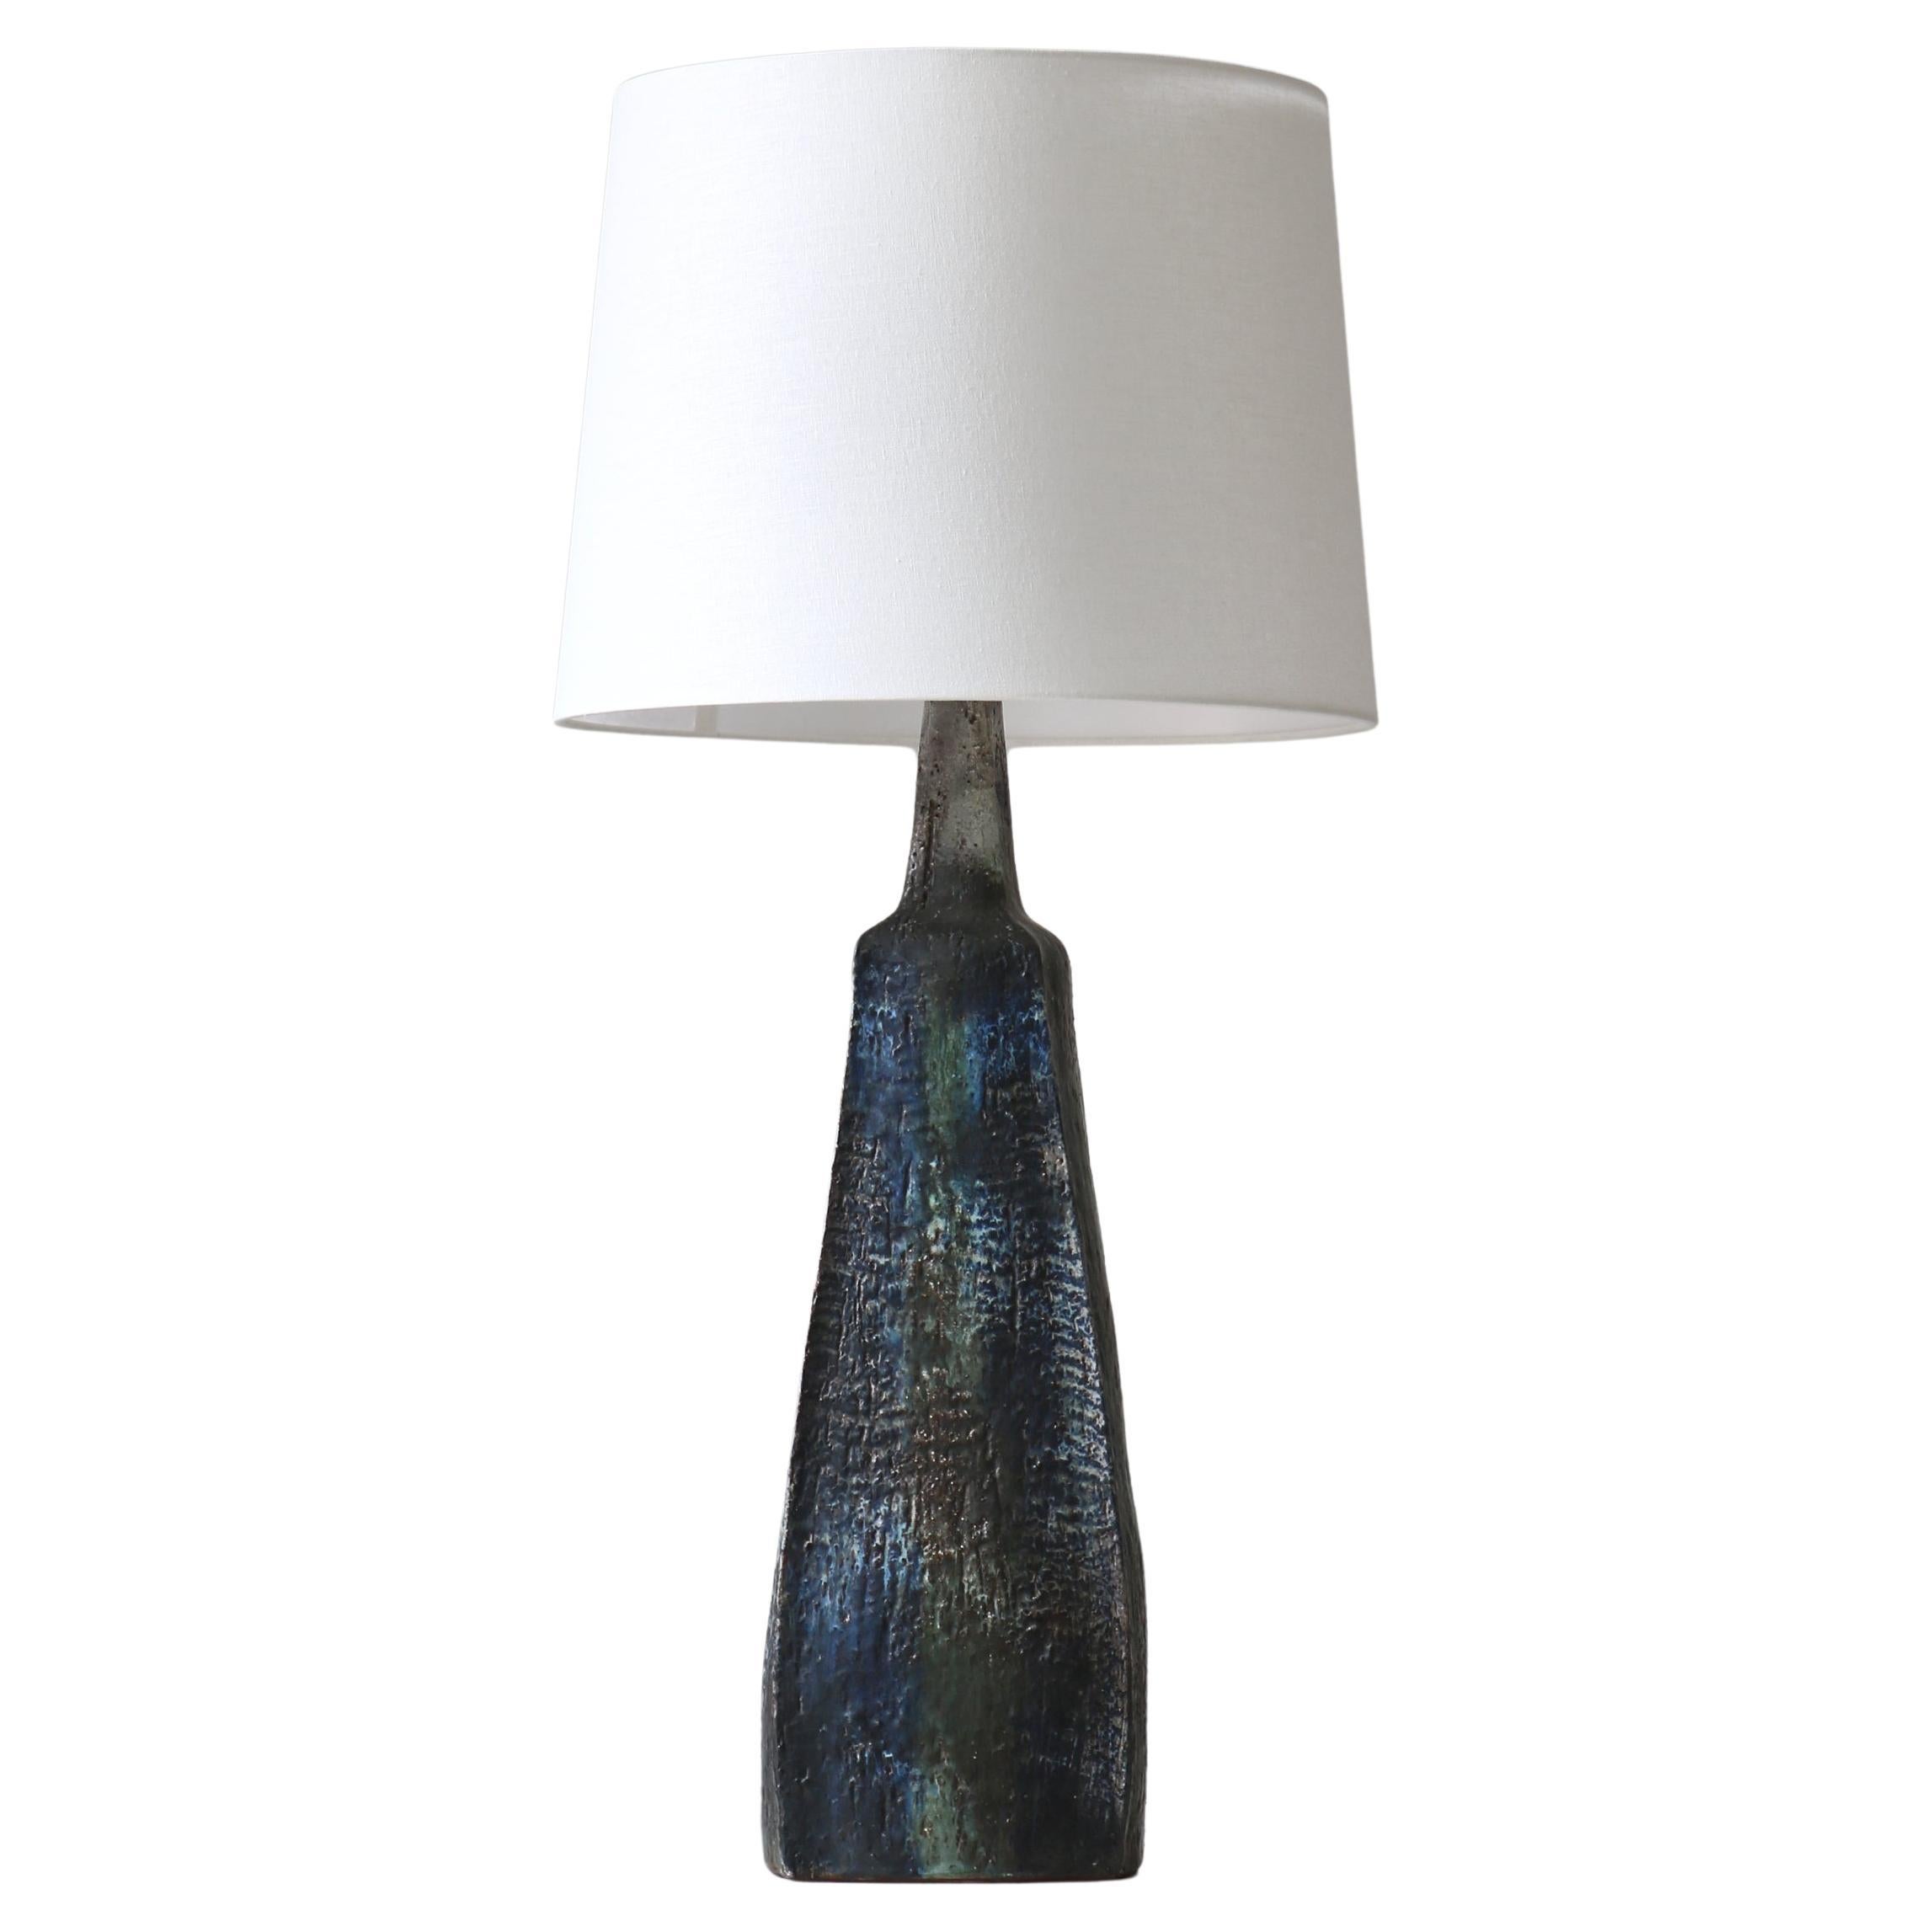 Large Stoneware Table Lamp Handmade by "Sejer" Denmark, 1960s Brutalism For Sale